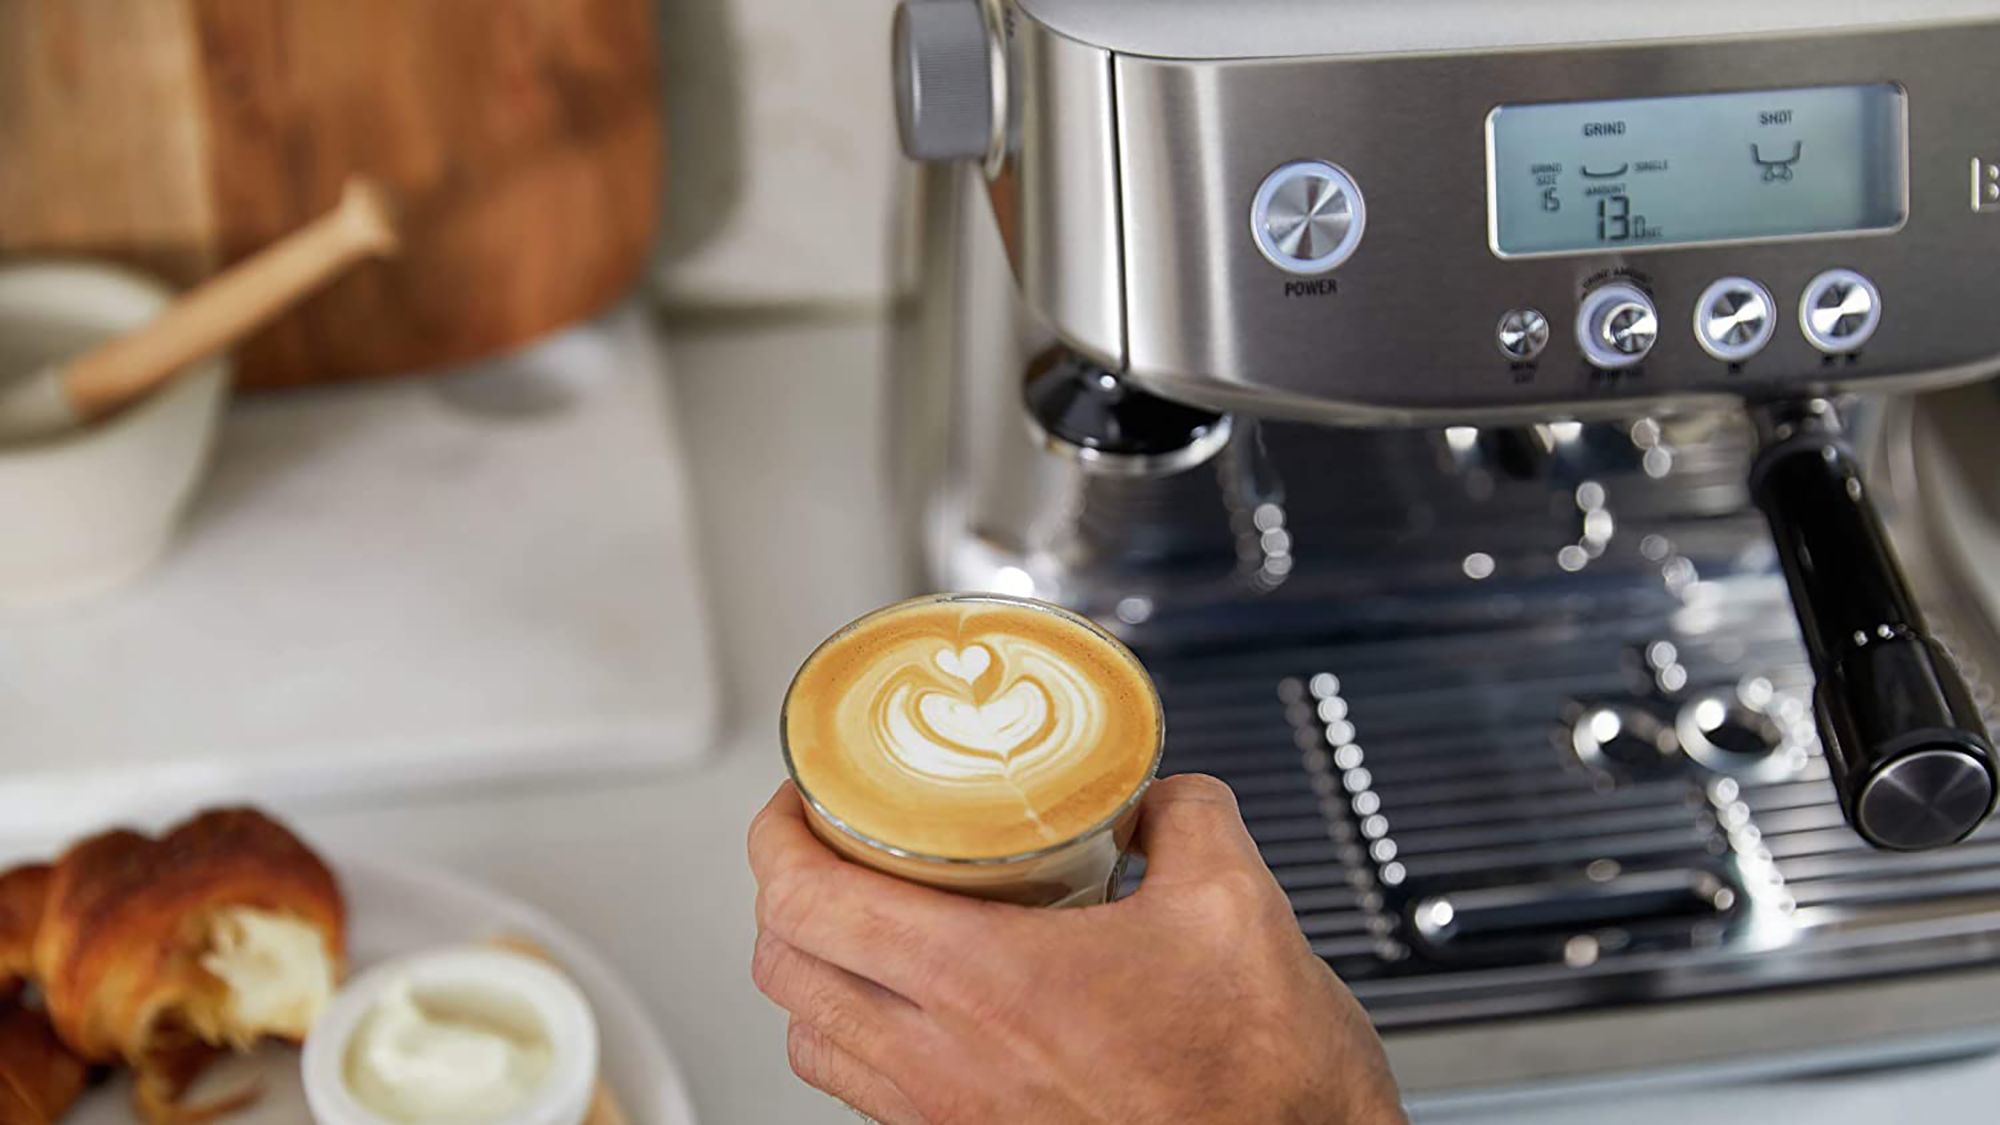 Two of our favorite Breville espresso makers are $100 off on Amazon | CNN Underscored